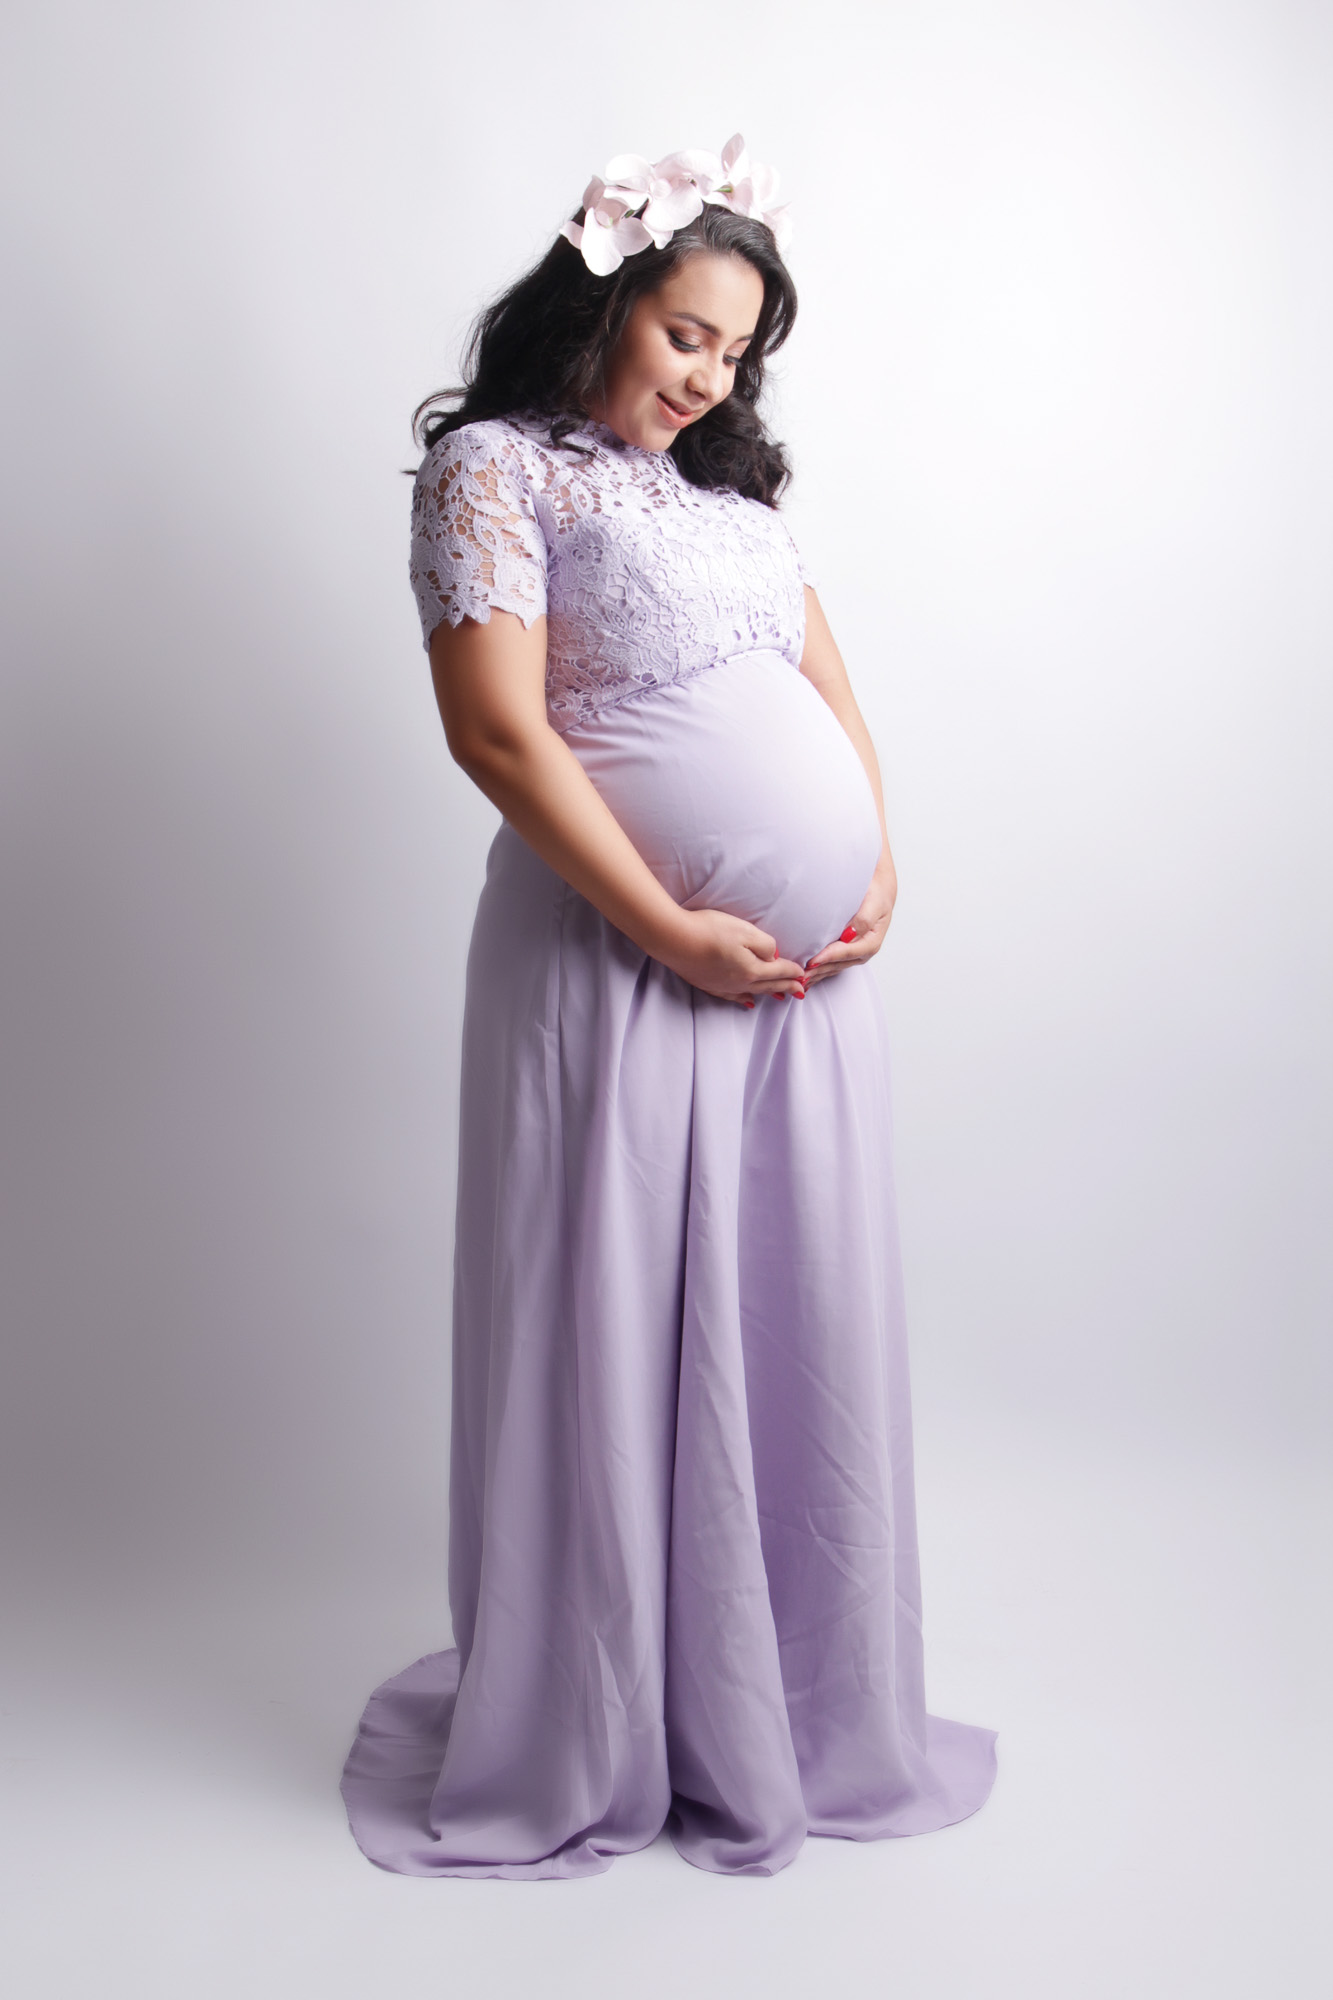 professional portrait of pregnant woman in lilac dress and flower crown holding bump